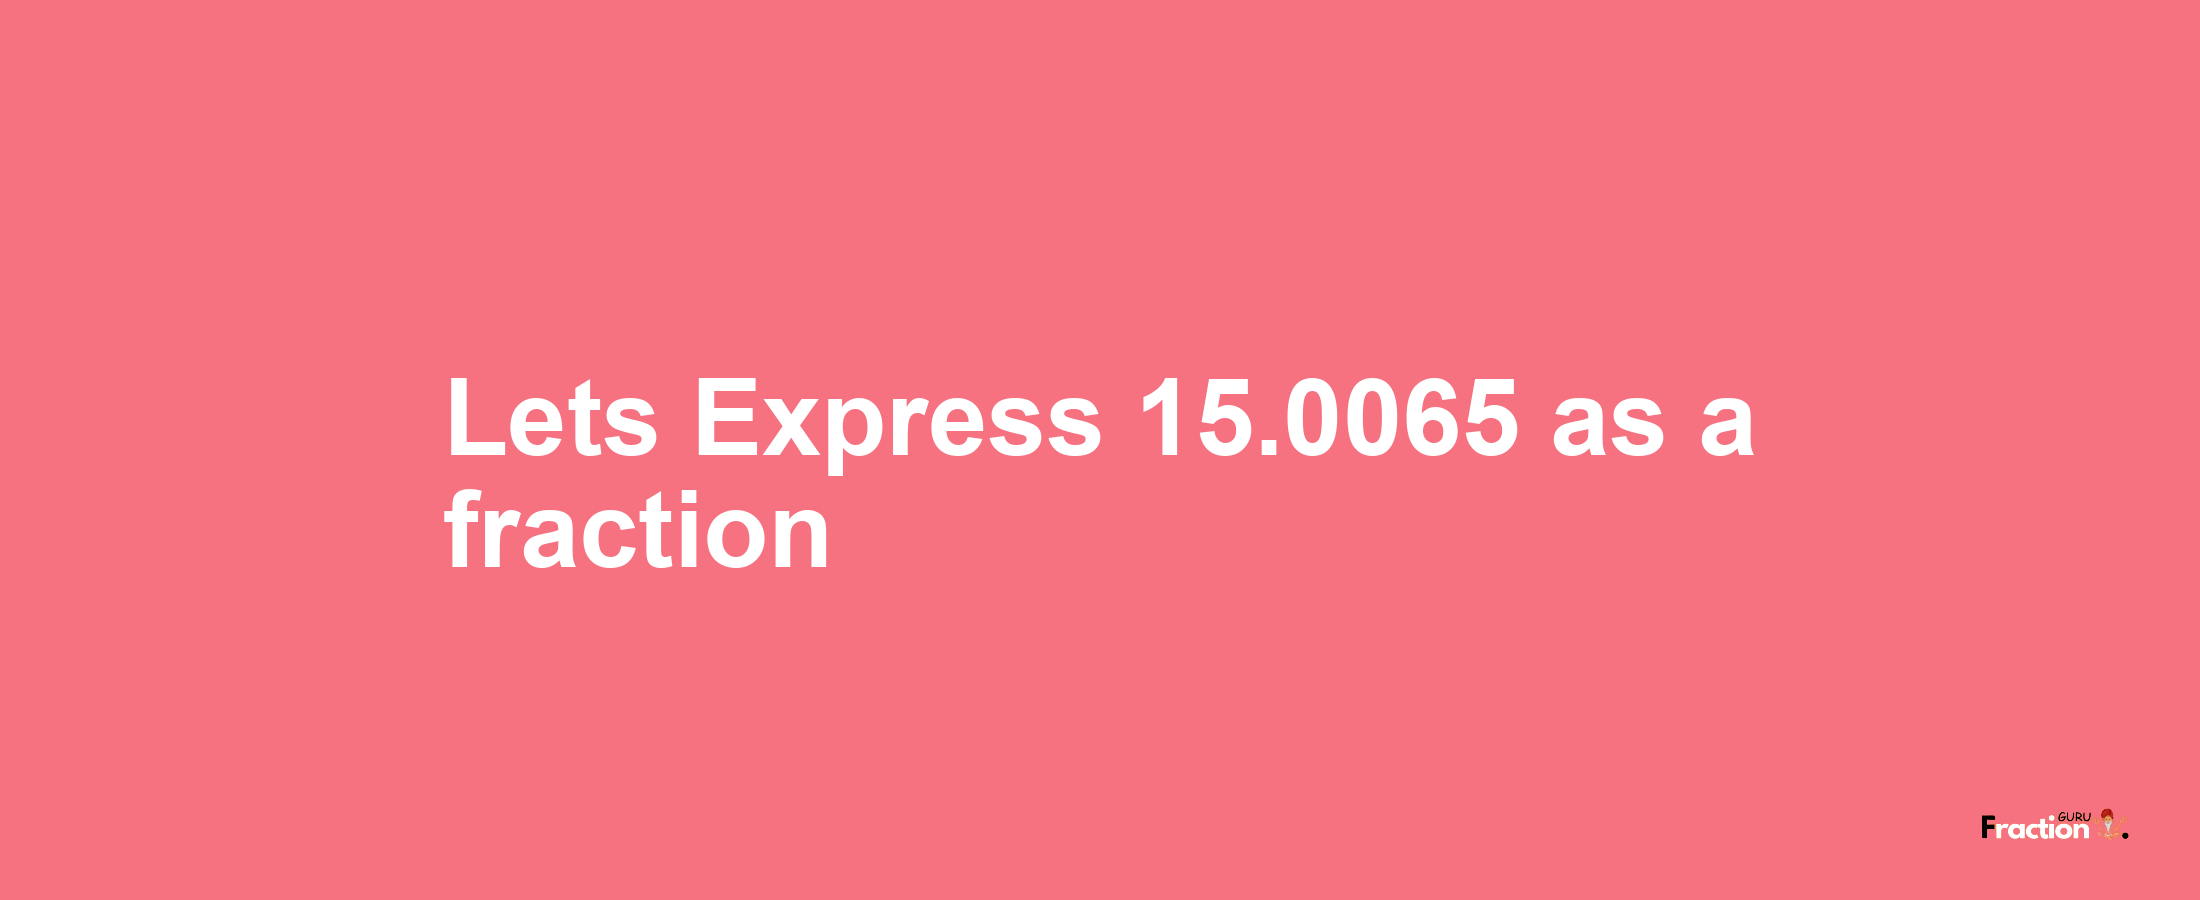 Lets Express 15.0065 as afraction